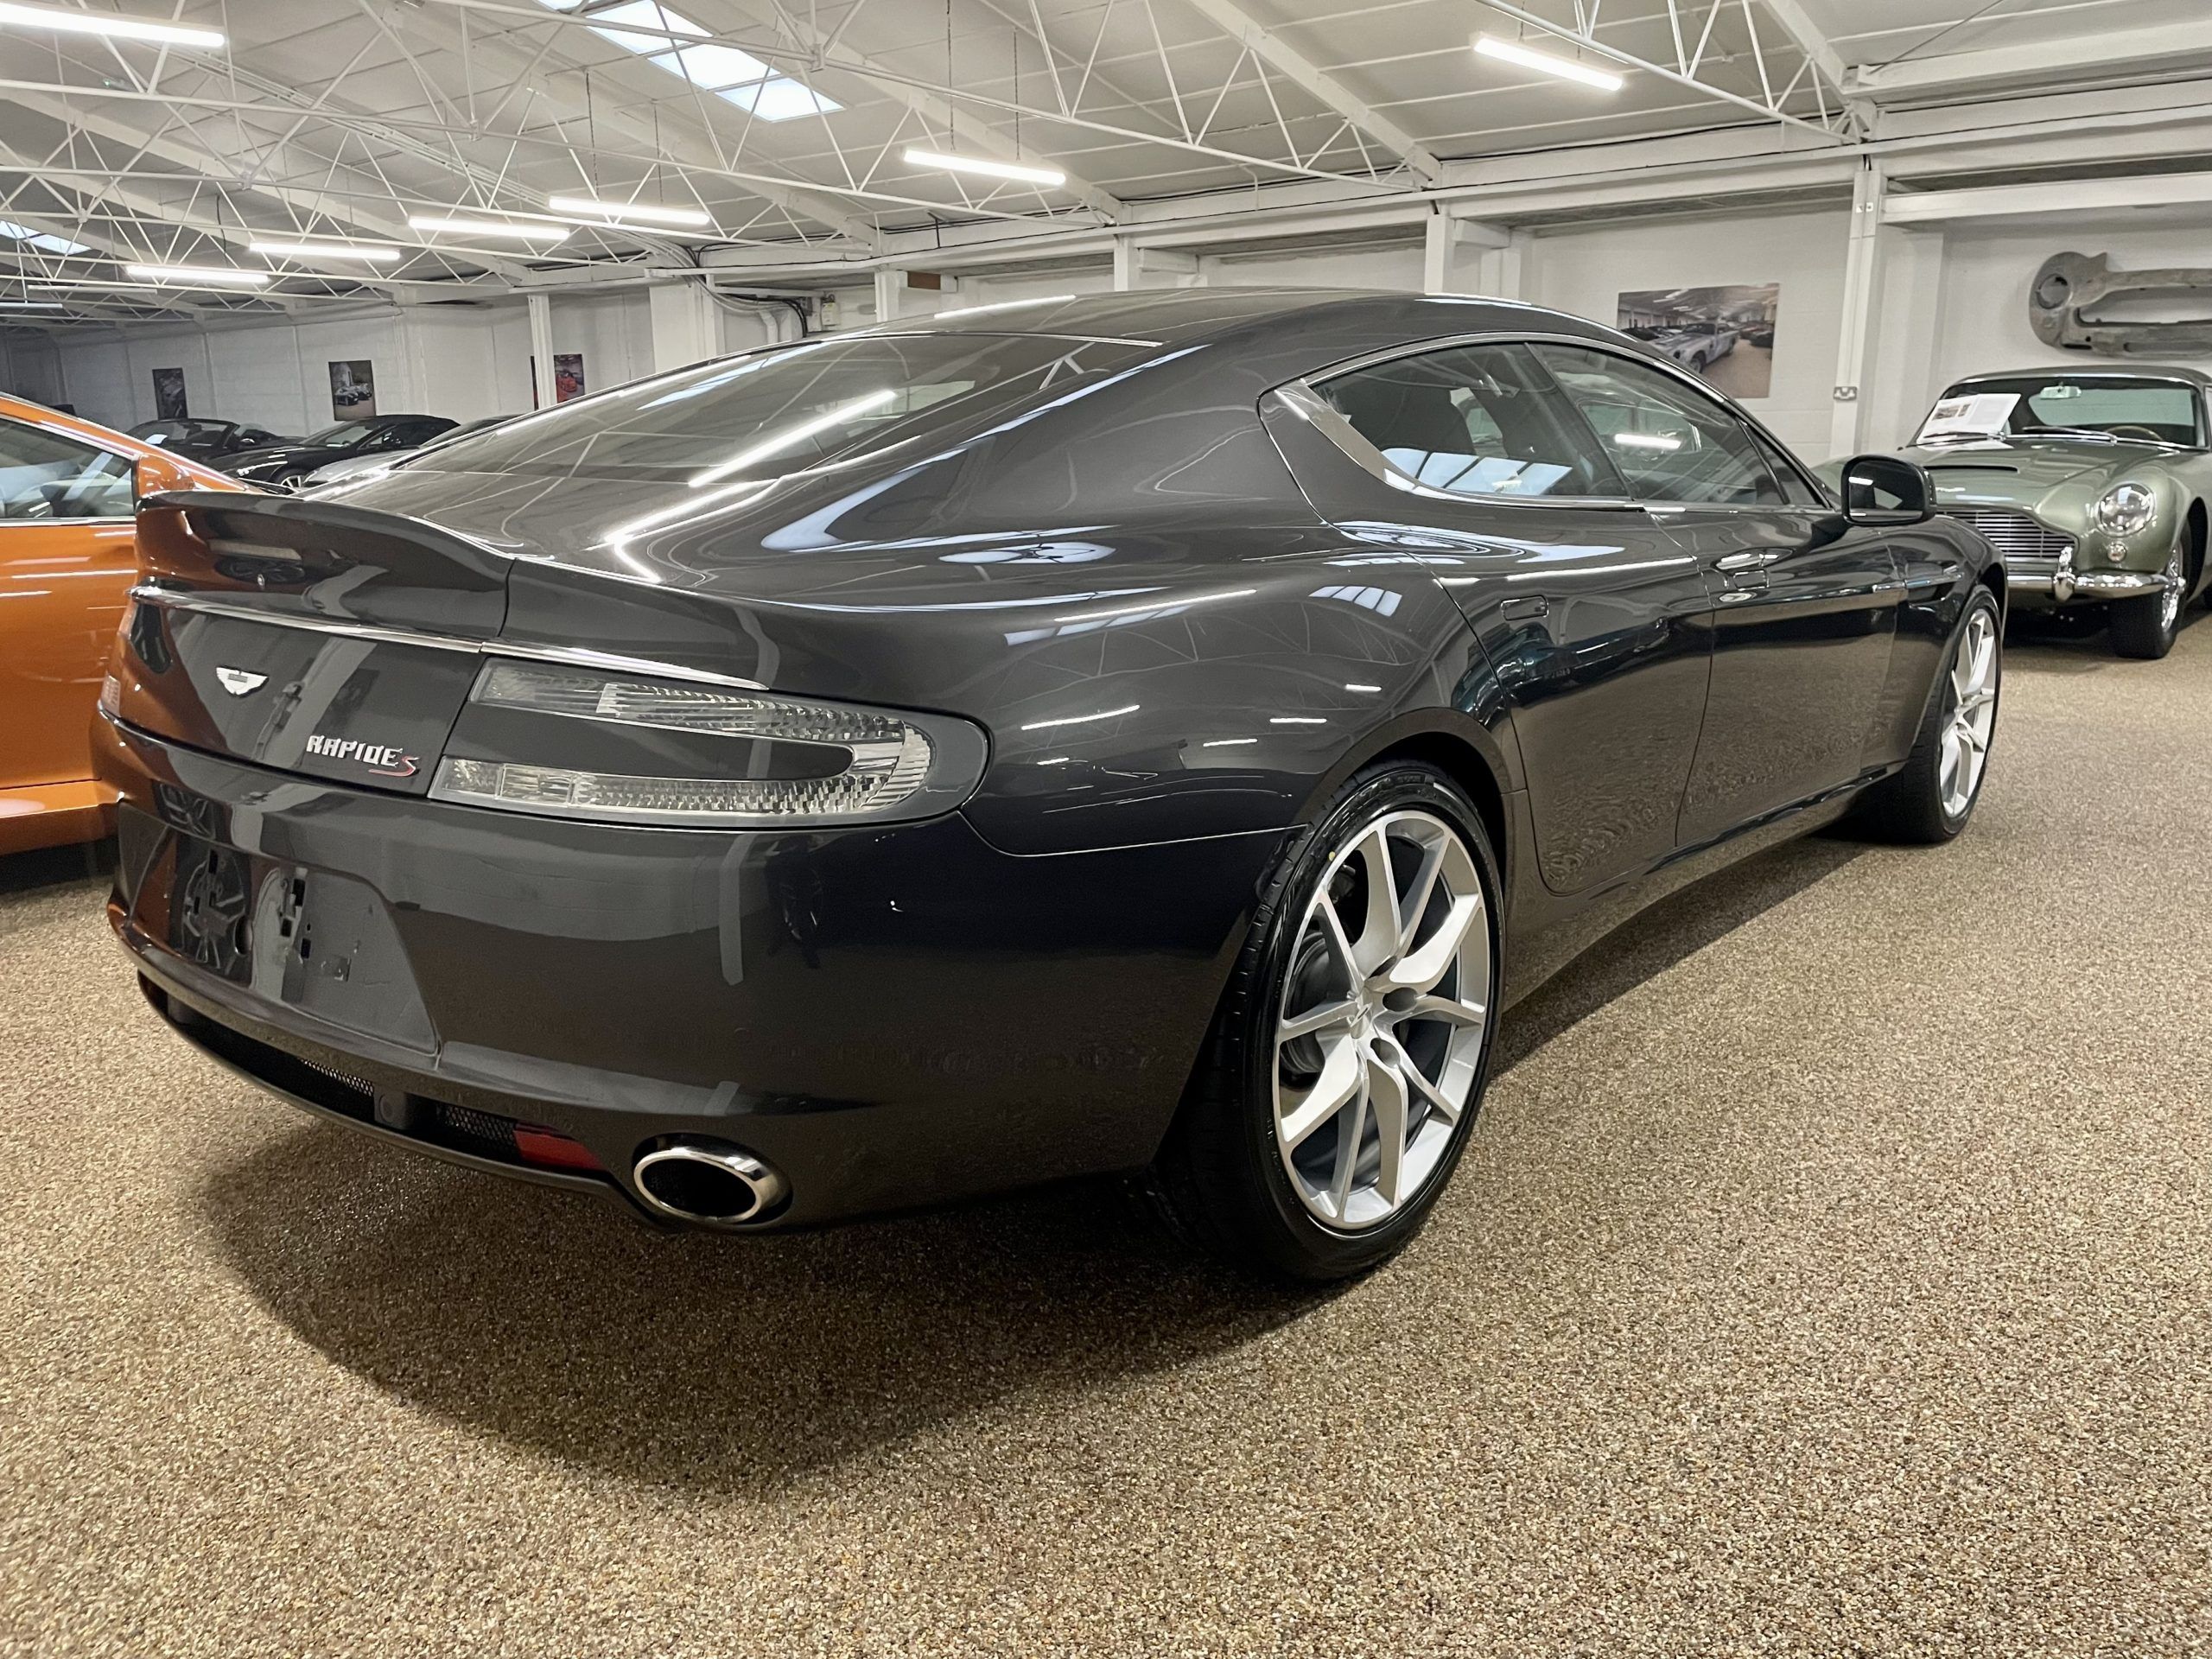 Used Aston Martin Rapide S for sale